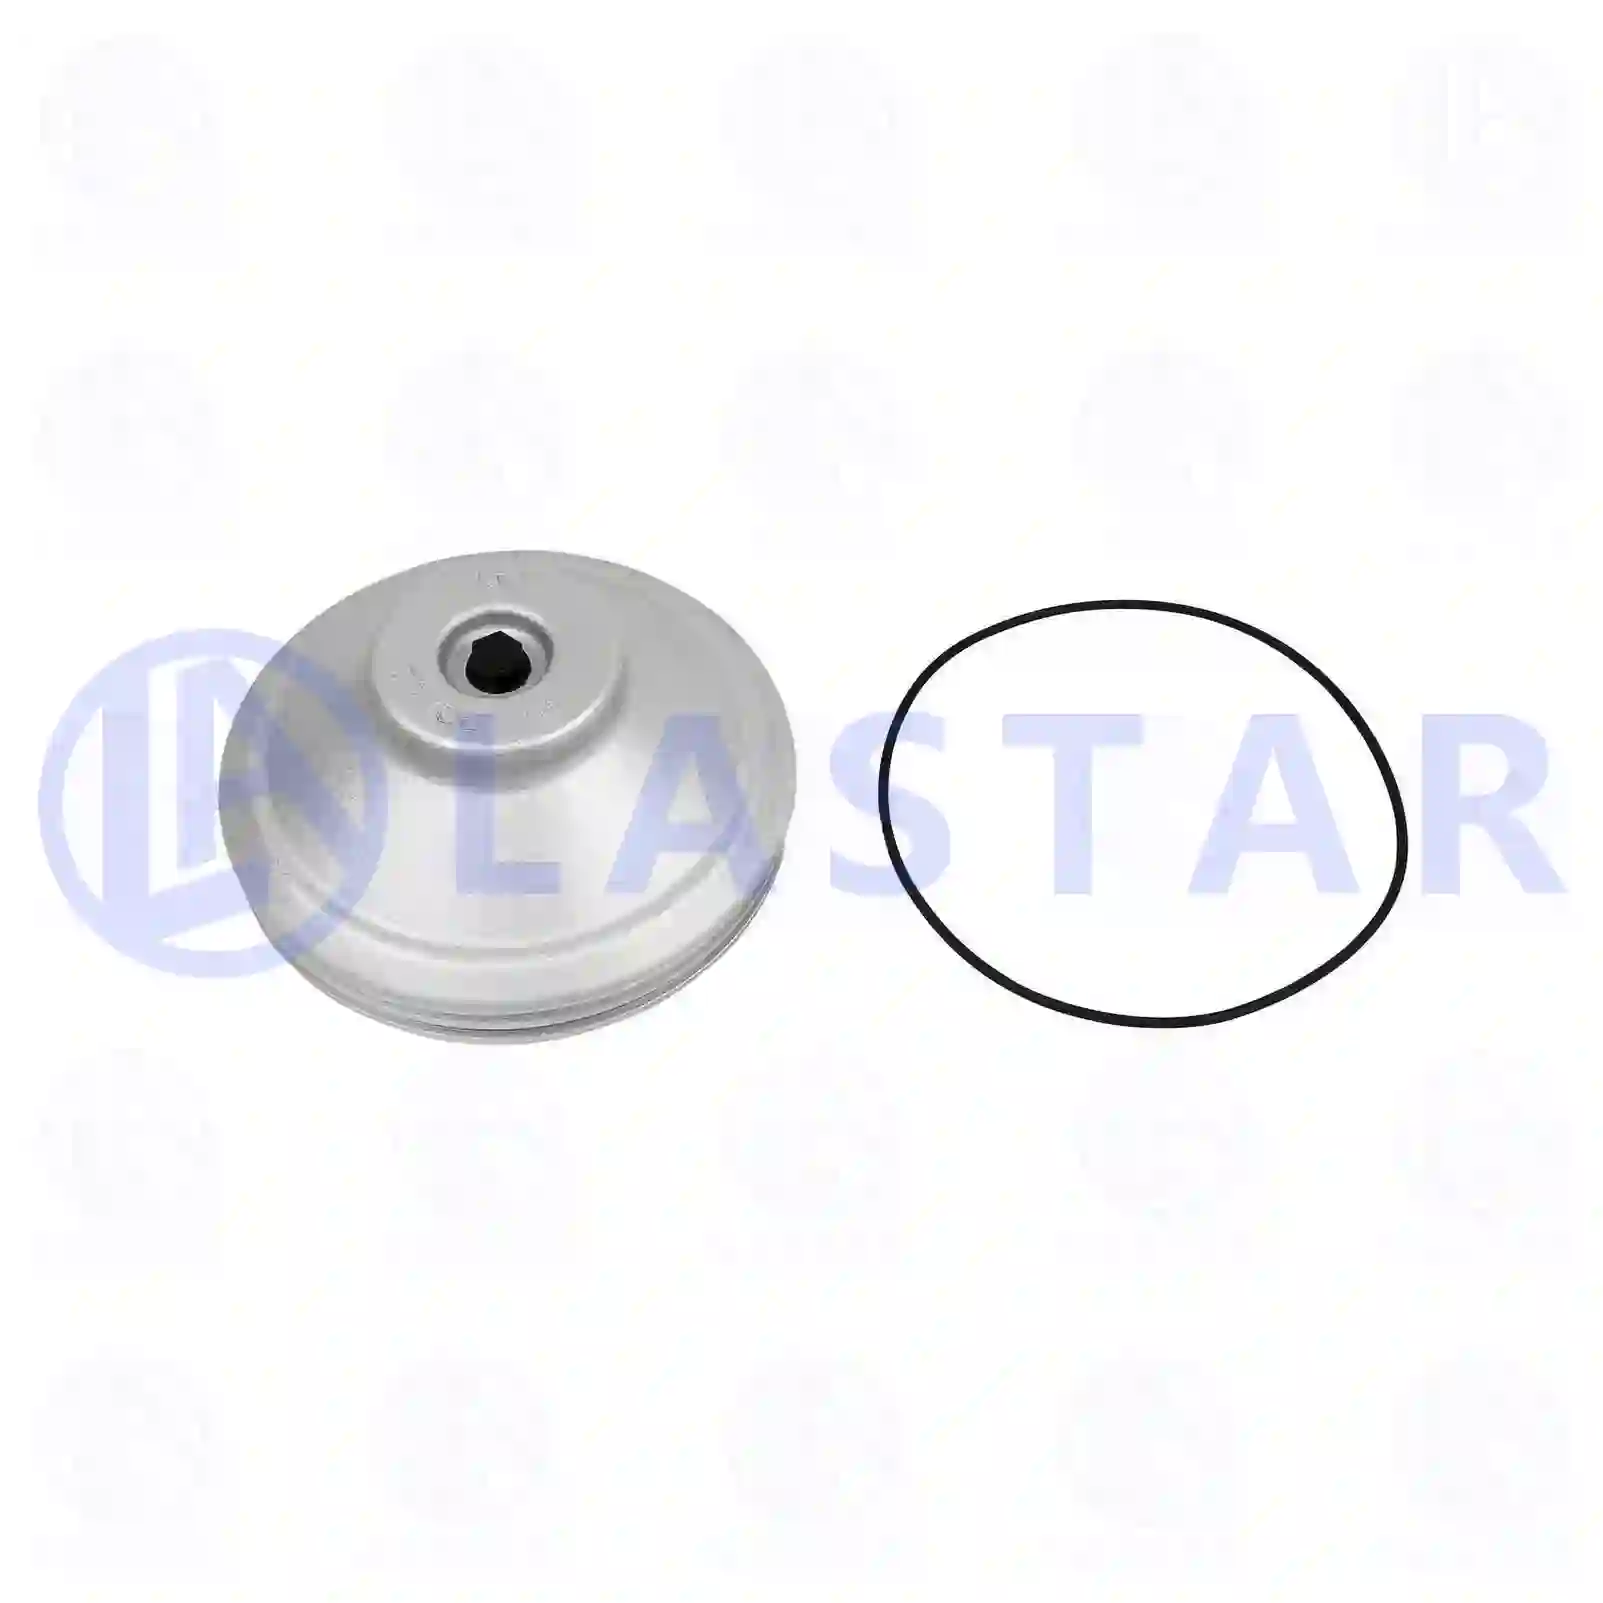 Hub cover, complete with o-ring, 77726904, 1381114, 1480333, 1728076, 1750065, 1762224, 1762224S1, ZG30059-0008 ||  77726904 Lastar Spare Part | Truck Spare Parts, Auotomotive Spare Parts Hub cover, complete with o-ring, 77726904, 1381114, 1480333, 1728076, 1750065, 1762224, 1762224S1, ZG30059-0008 ||  77726904 Lastar Spare Part | Truck Spare Parts, Auotomotive Spare Parts